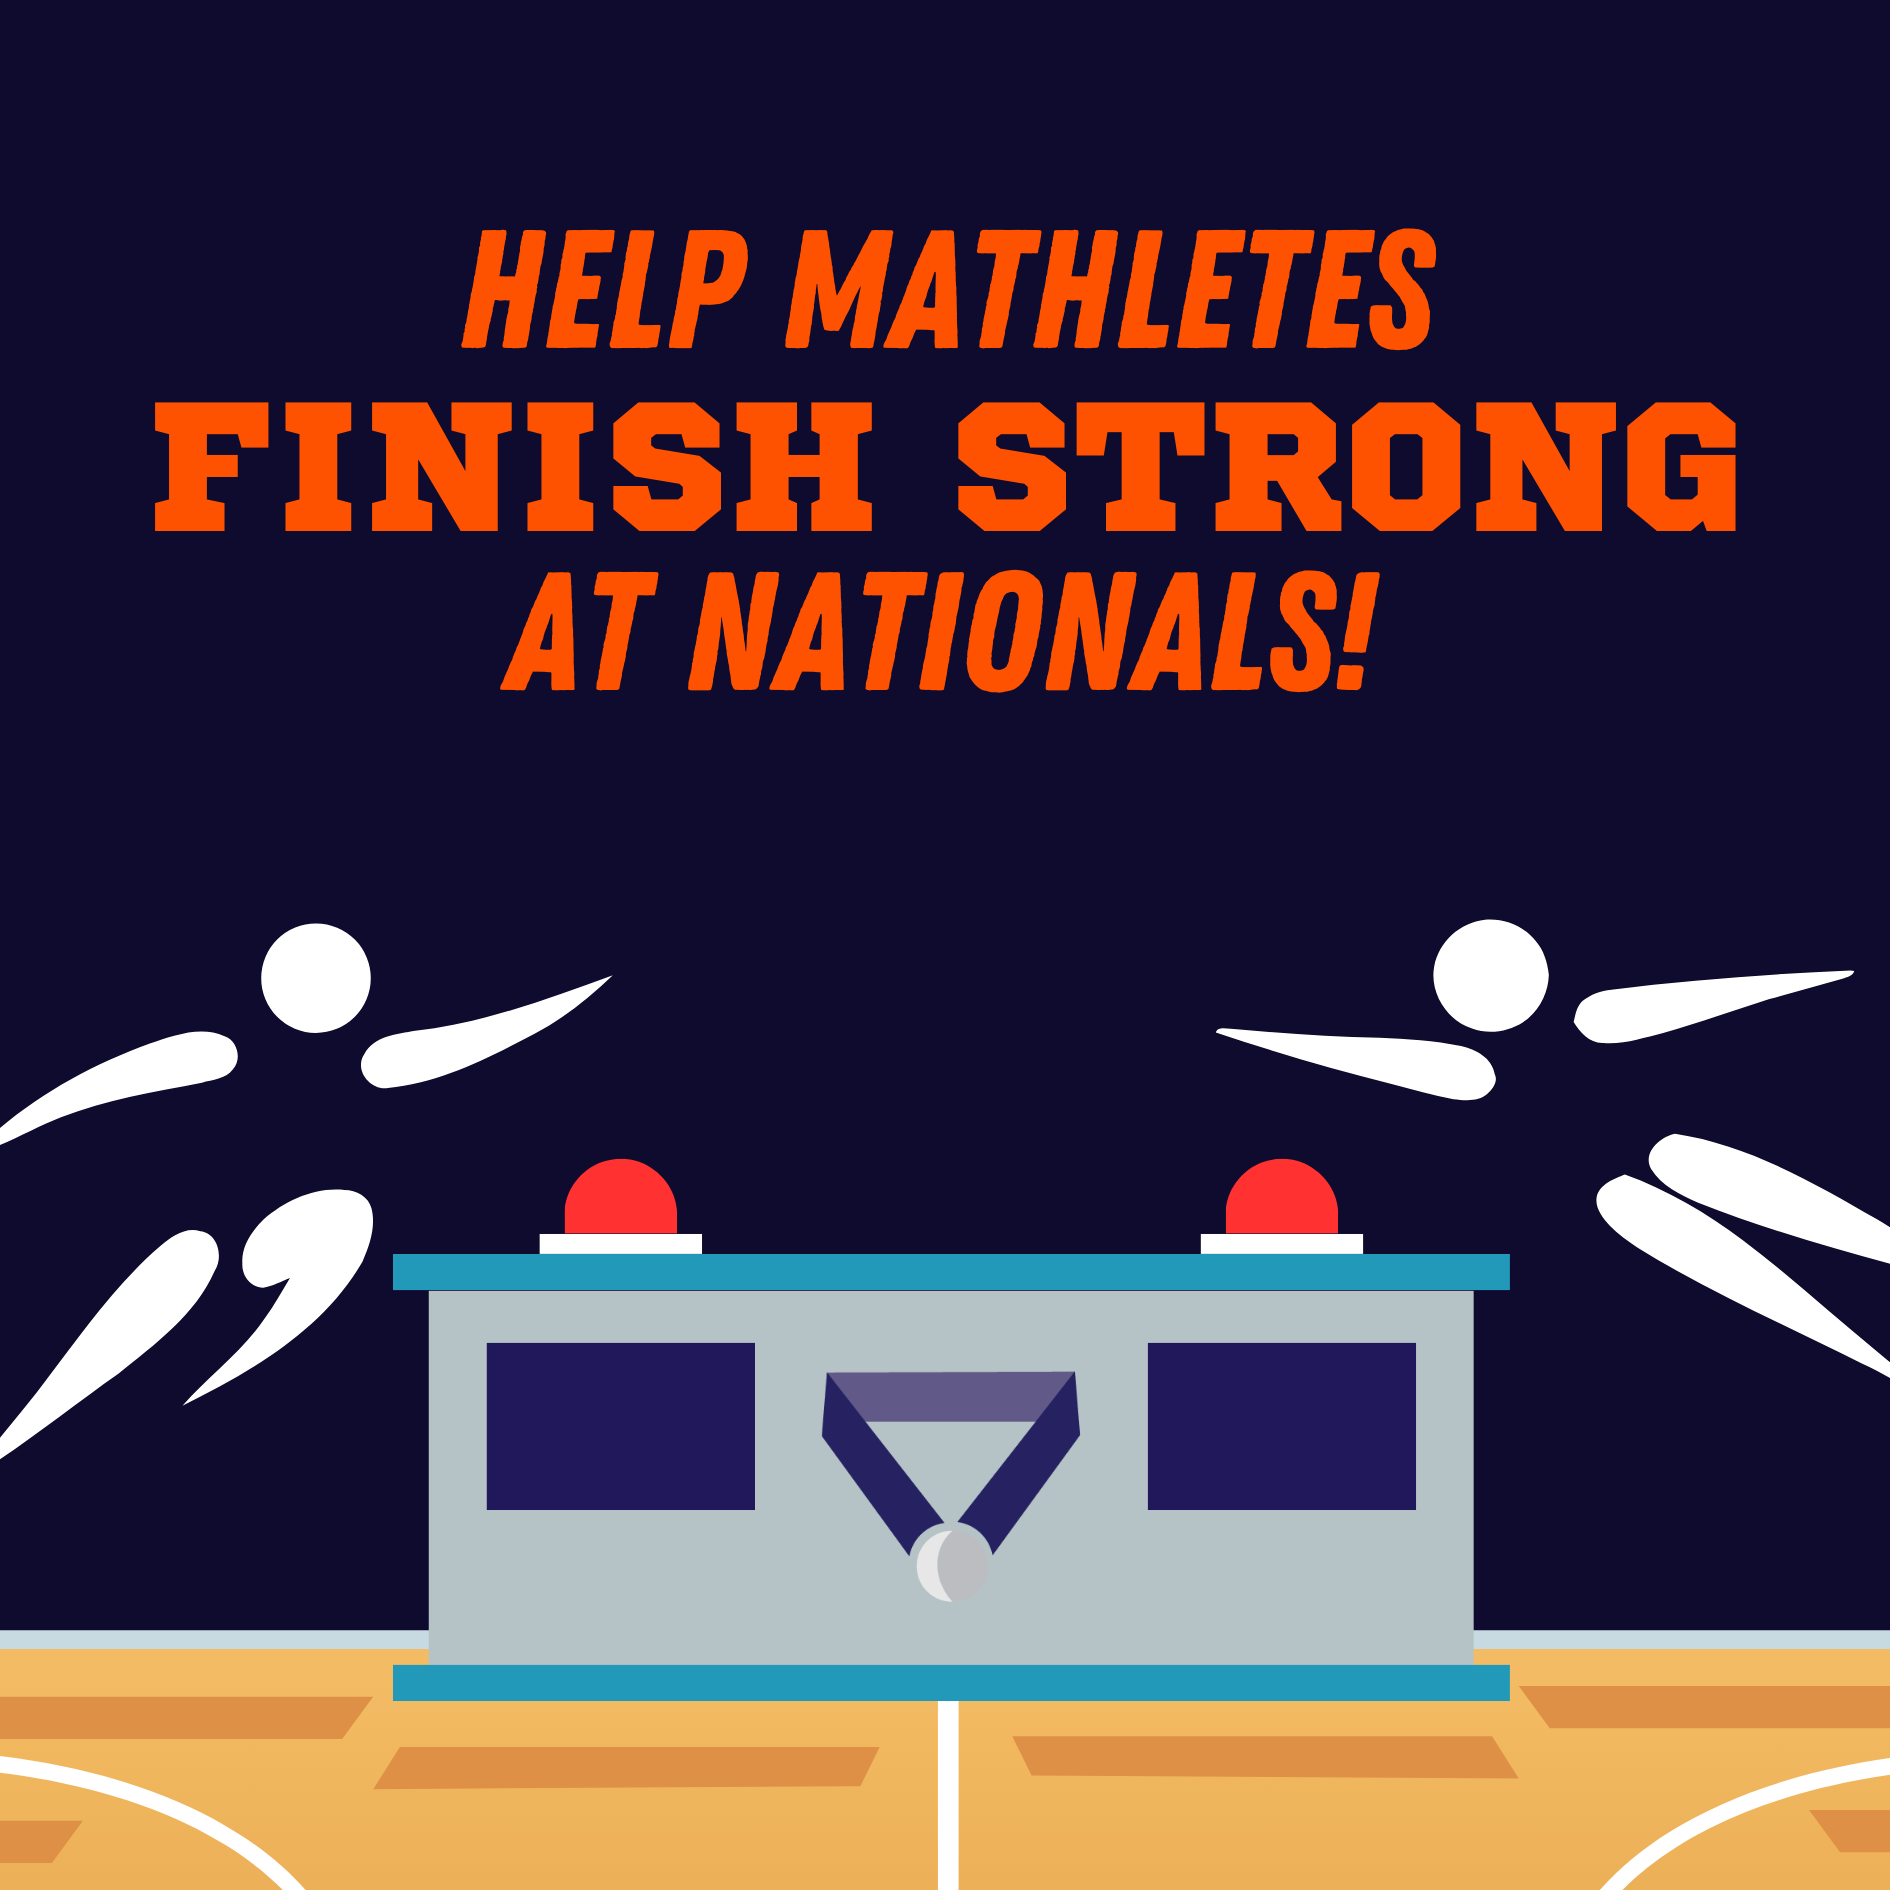 Graphic of two athletes on a basketball court leaping to push buzzer buttons on a podium. Text: Help Mathletes finish strong at nationals!